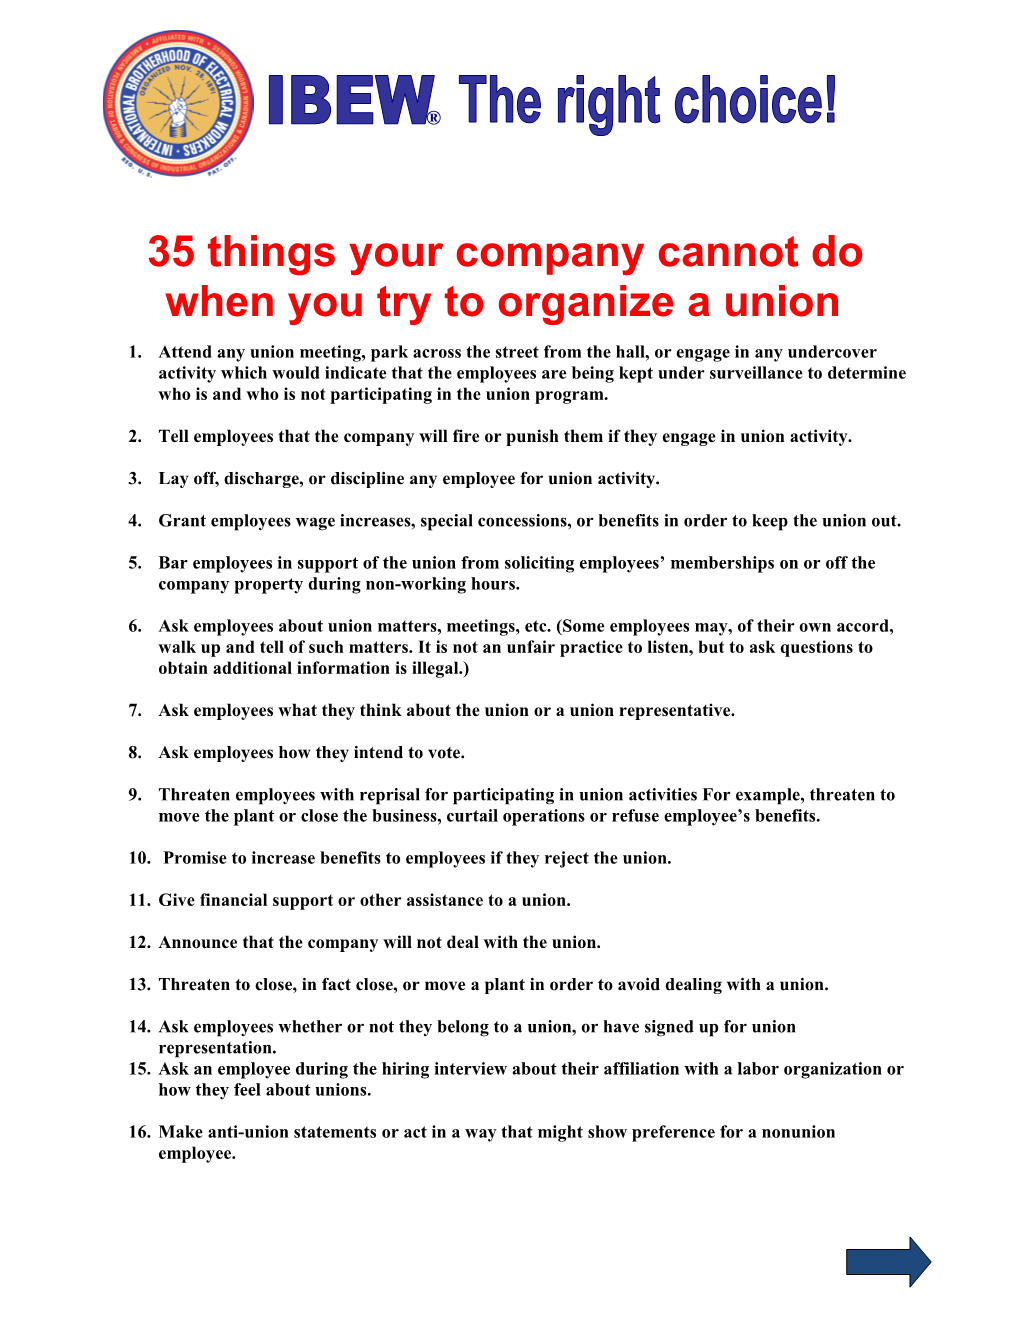 35 Things Your Company Cannot Do When You Try to Organize a Union